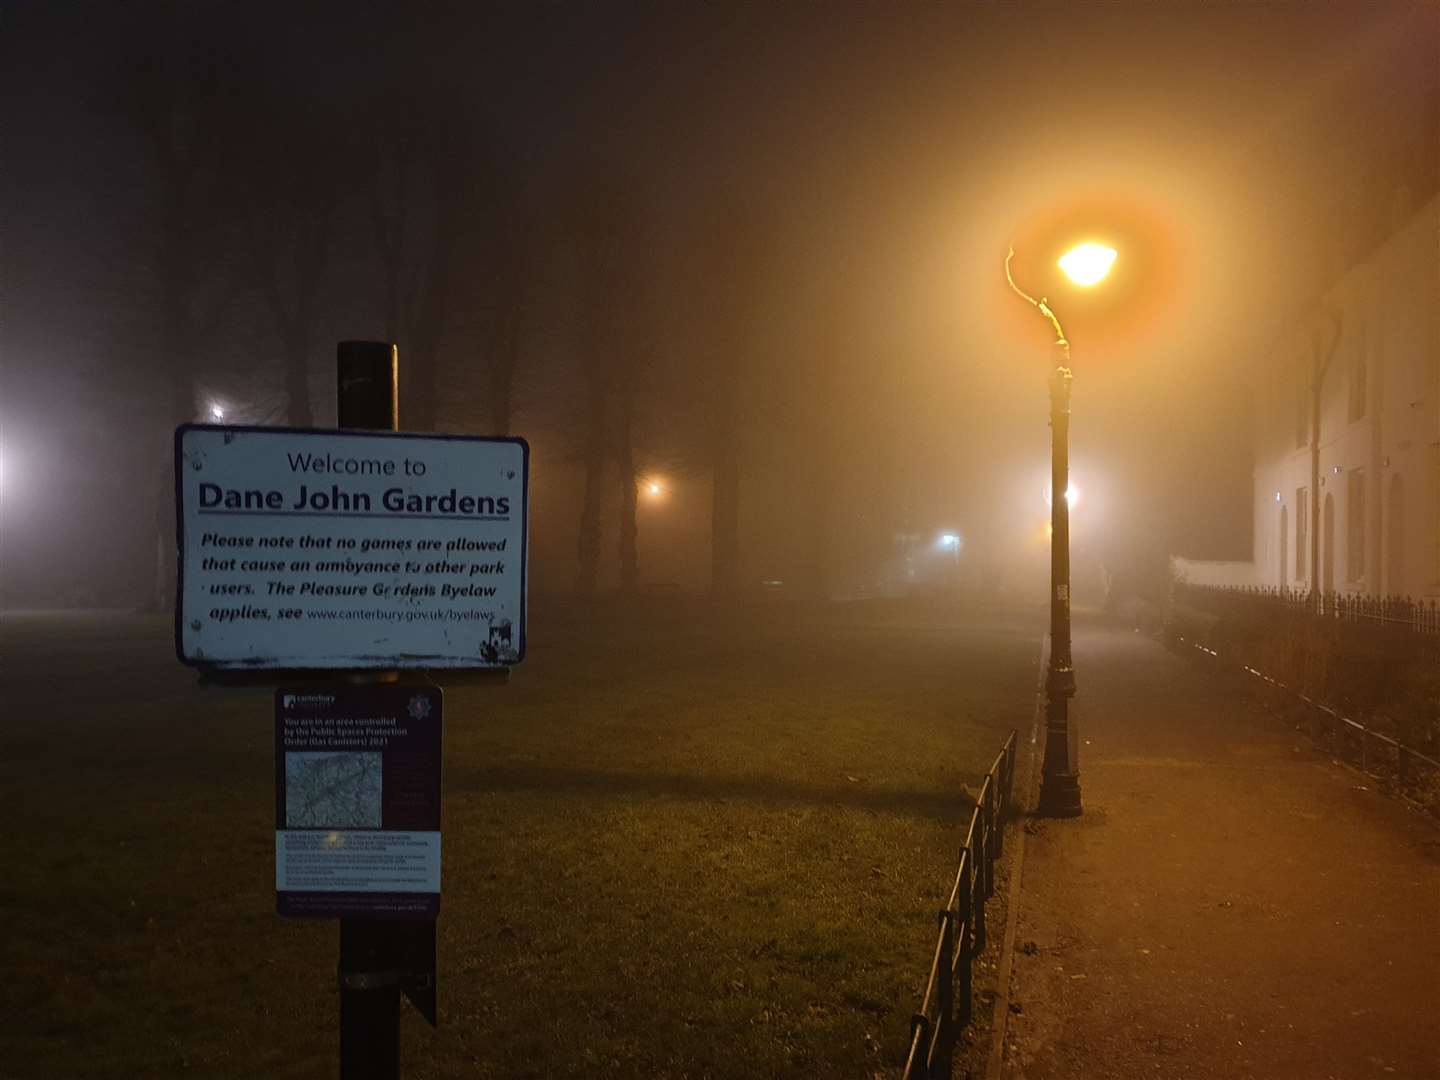 There were 10 sexual assaults and two rapes recorded in Canterbury's Dane John Gardens park in 2020 and 2021